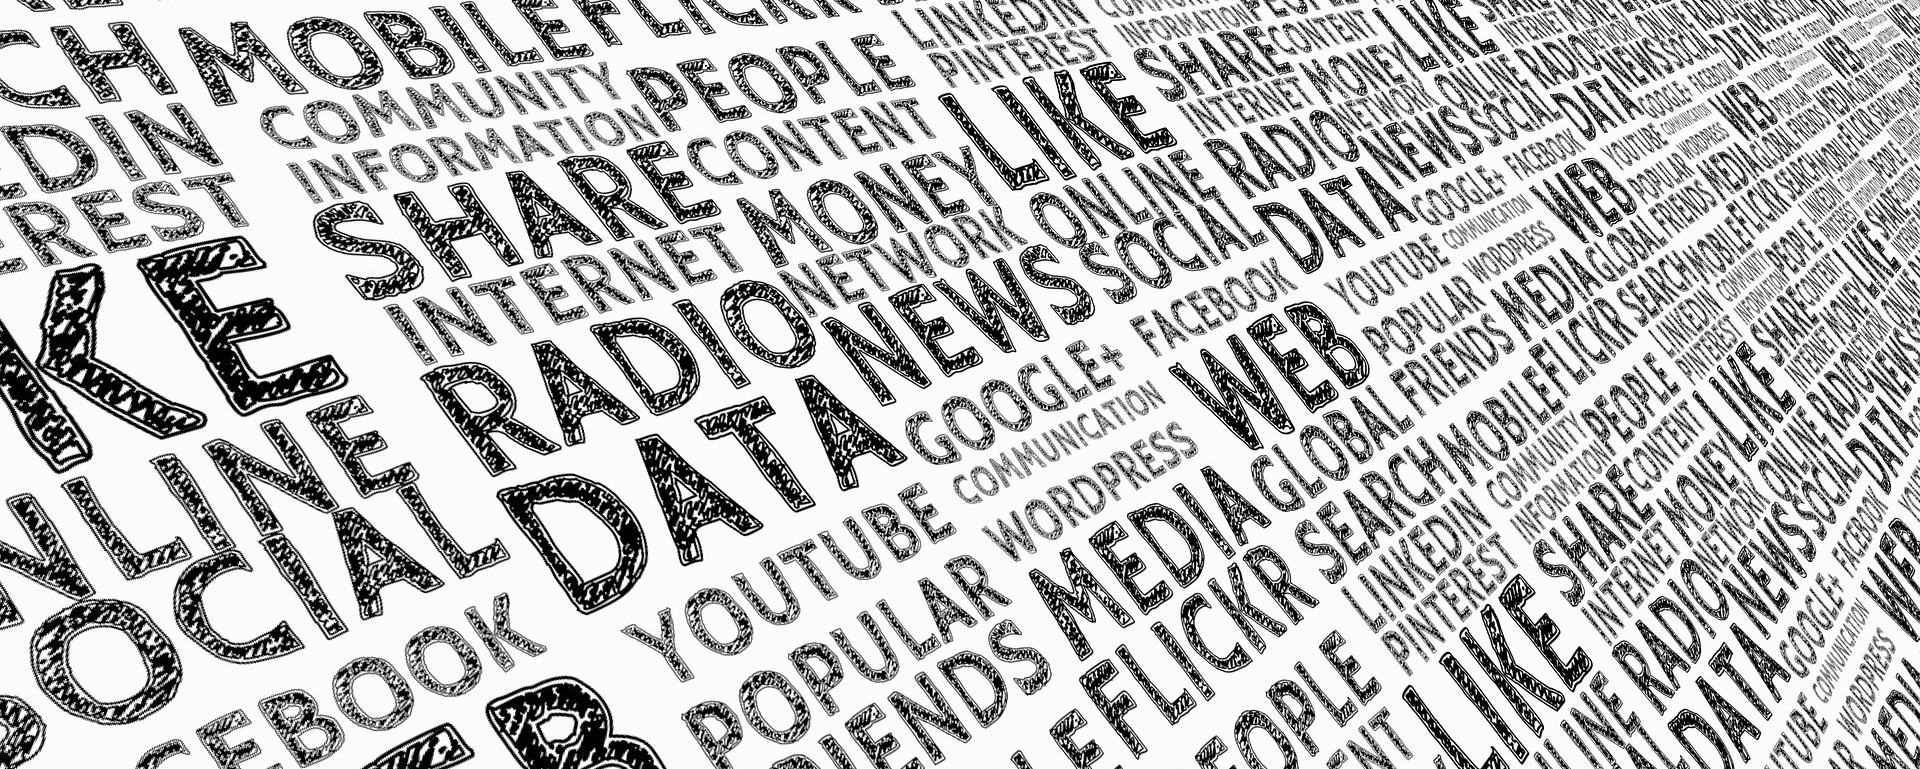 media words collage